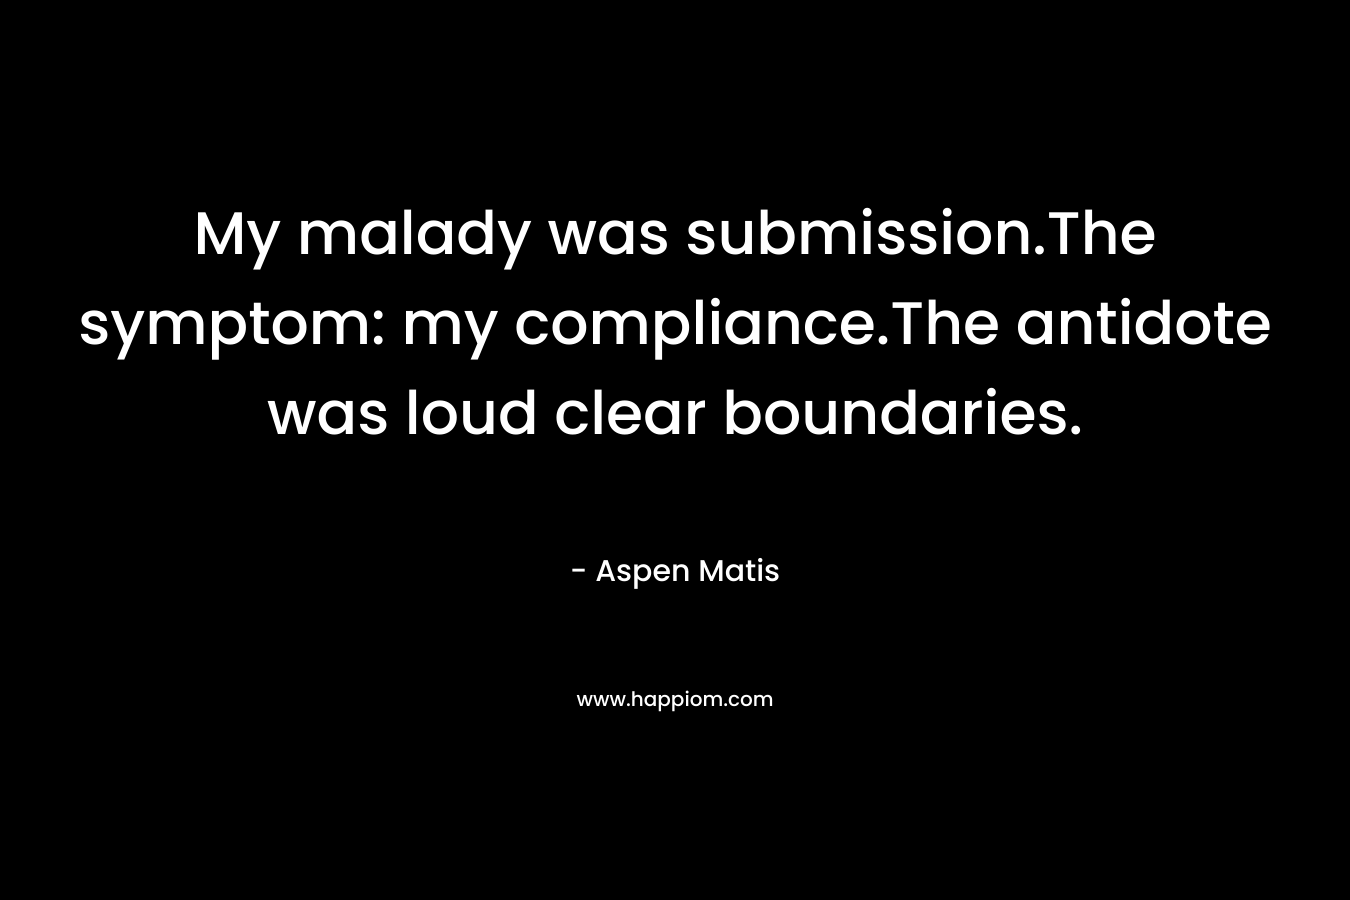 My malady was submission.The symptom: my compliance.The antidote was loud clear boundaries. – Aspen Matis